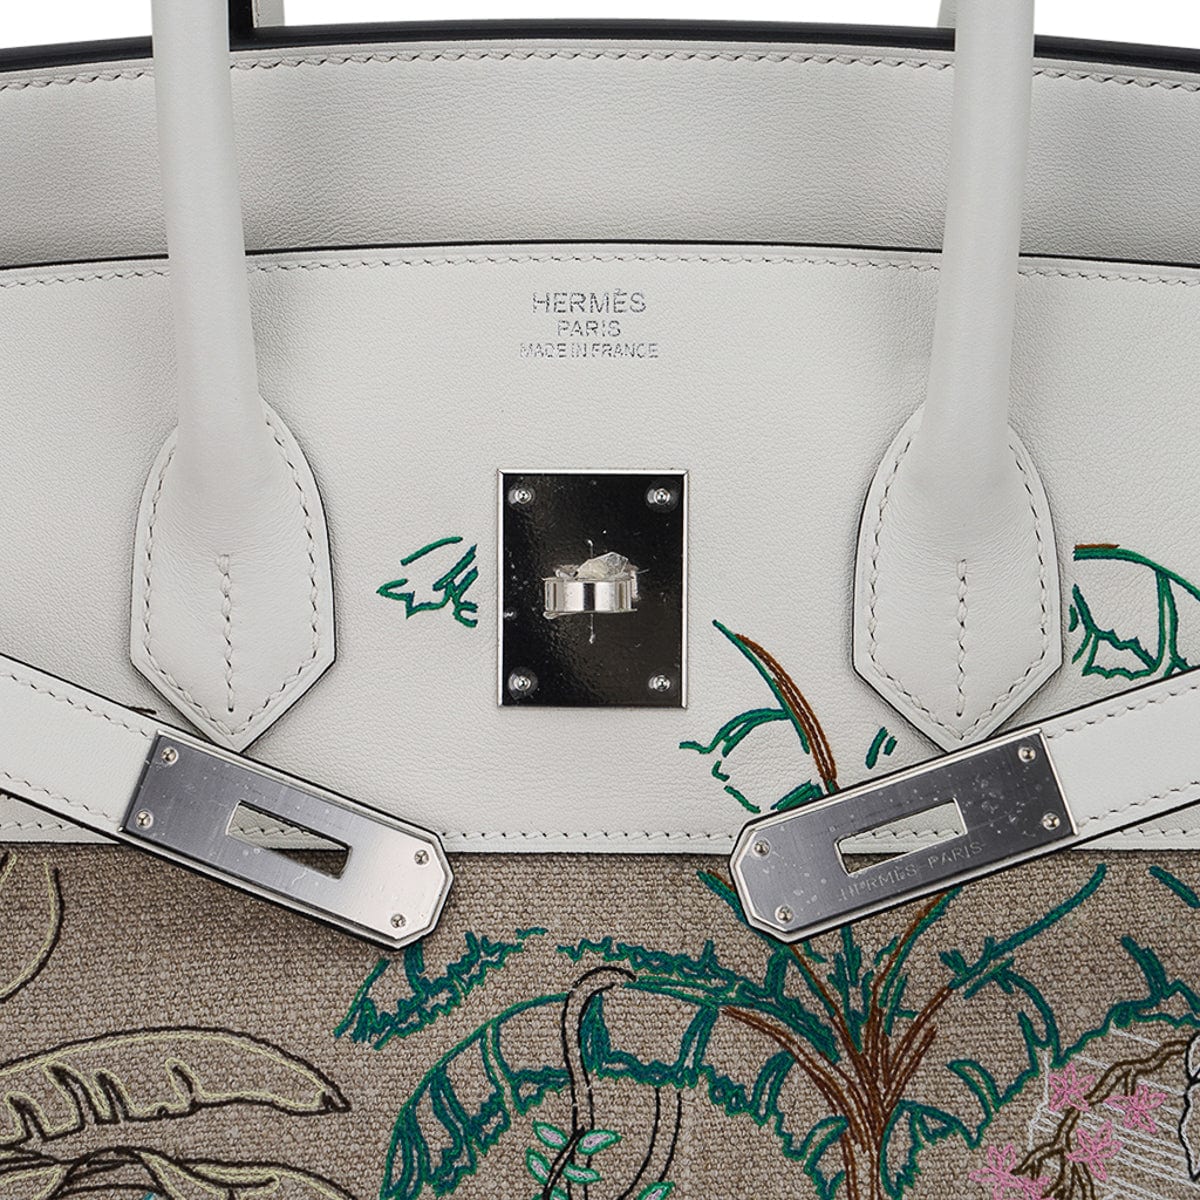 Hermes Limited Edition Birkin 35 Bag Faubourg Tropical Toile